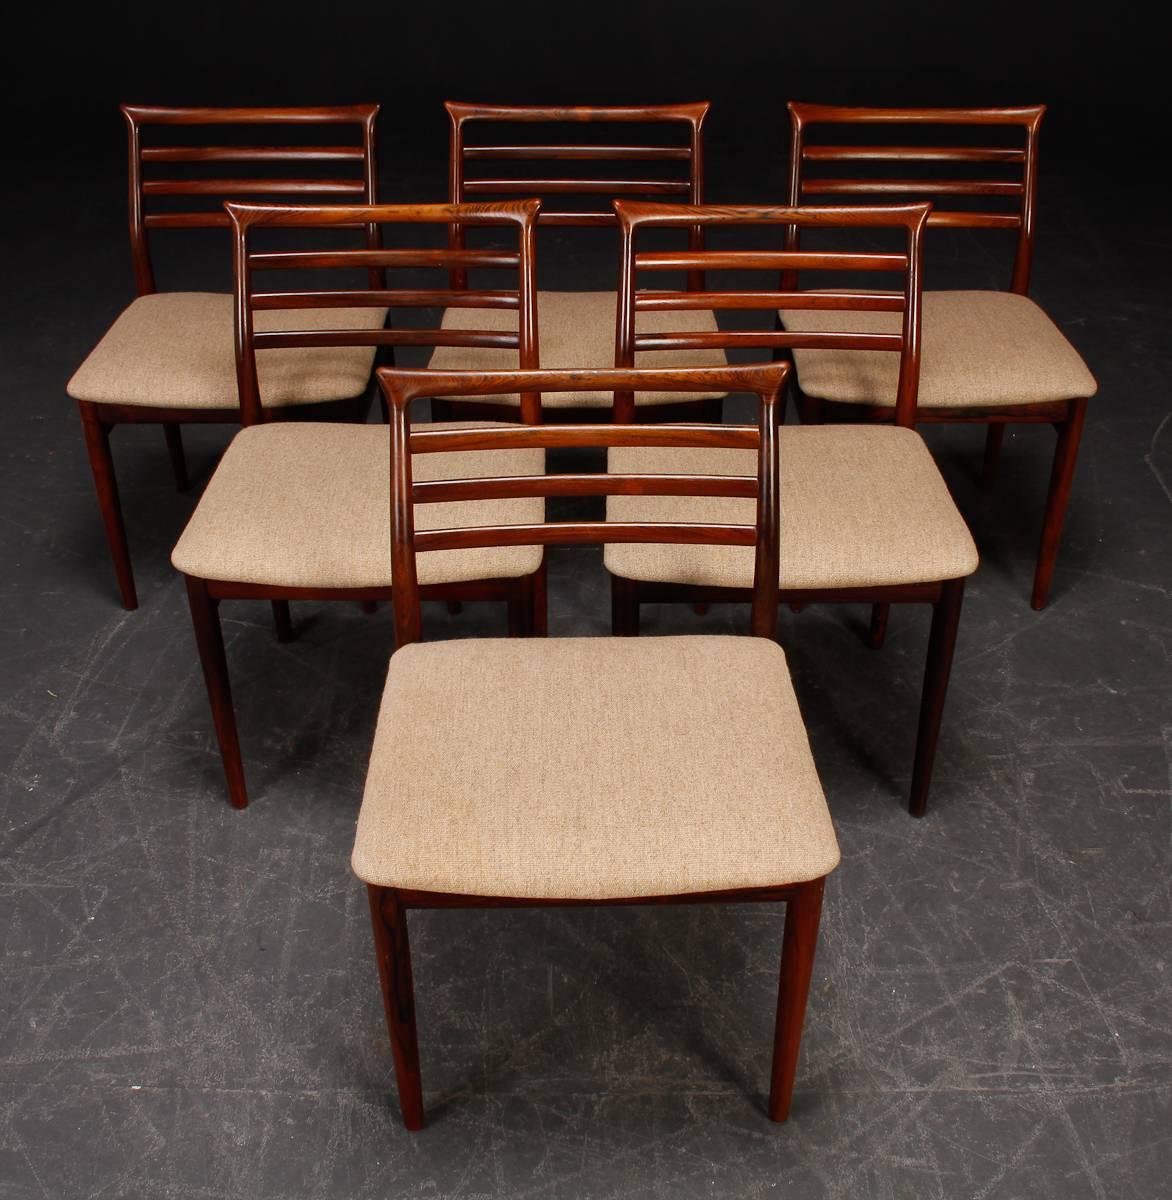 Dining chairs designed by Erling Torvits for Sorø stolefabrik in Denmark. Hand-sculpted solid hardwood.
Wood and upholstery restored.
Delivery time about 3-4 weeks!